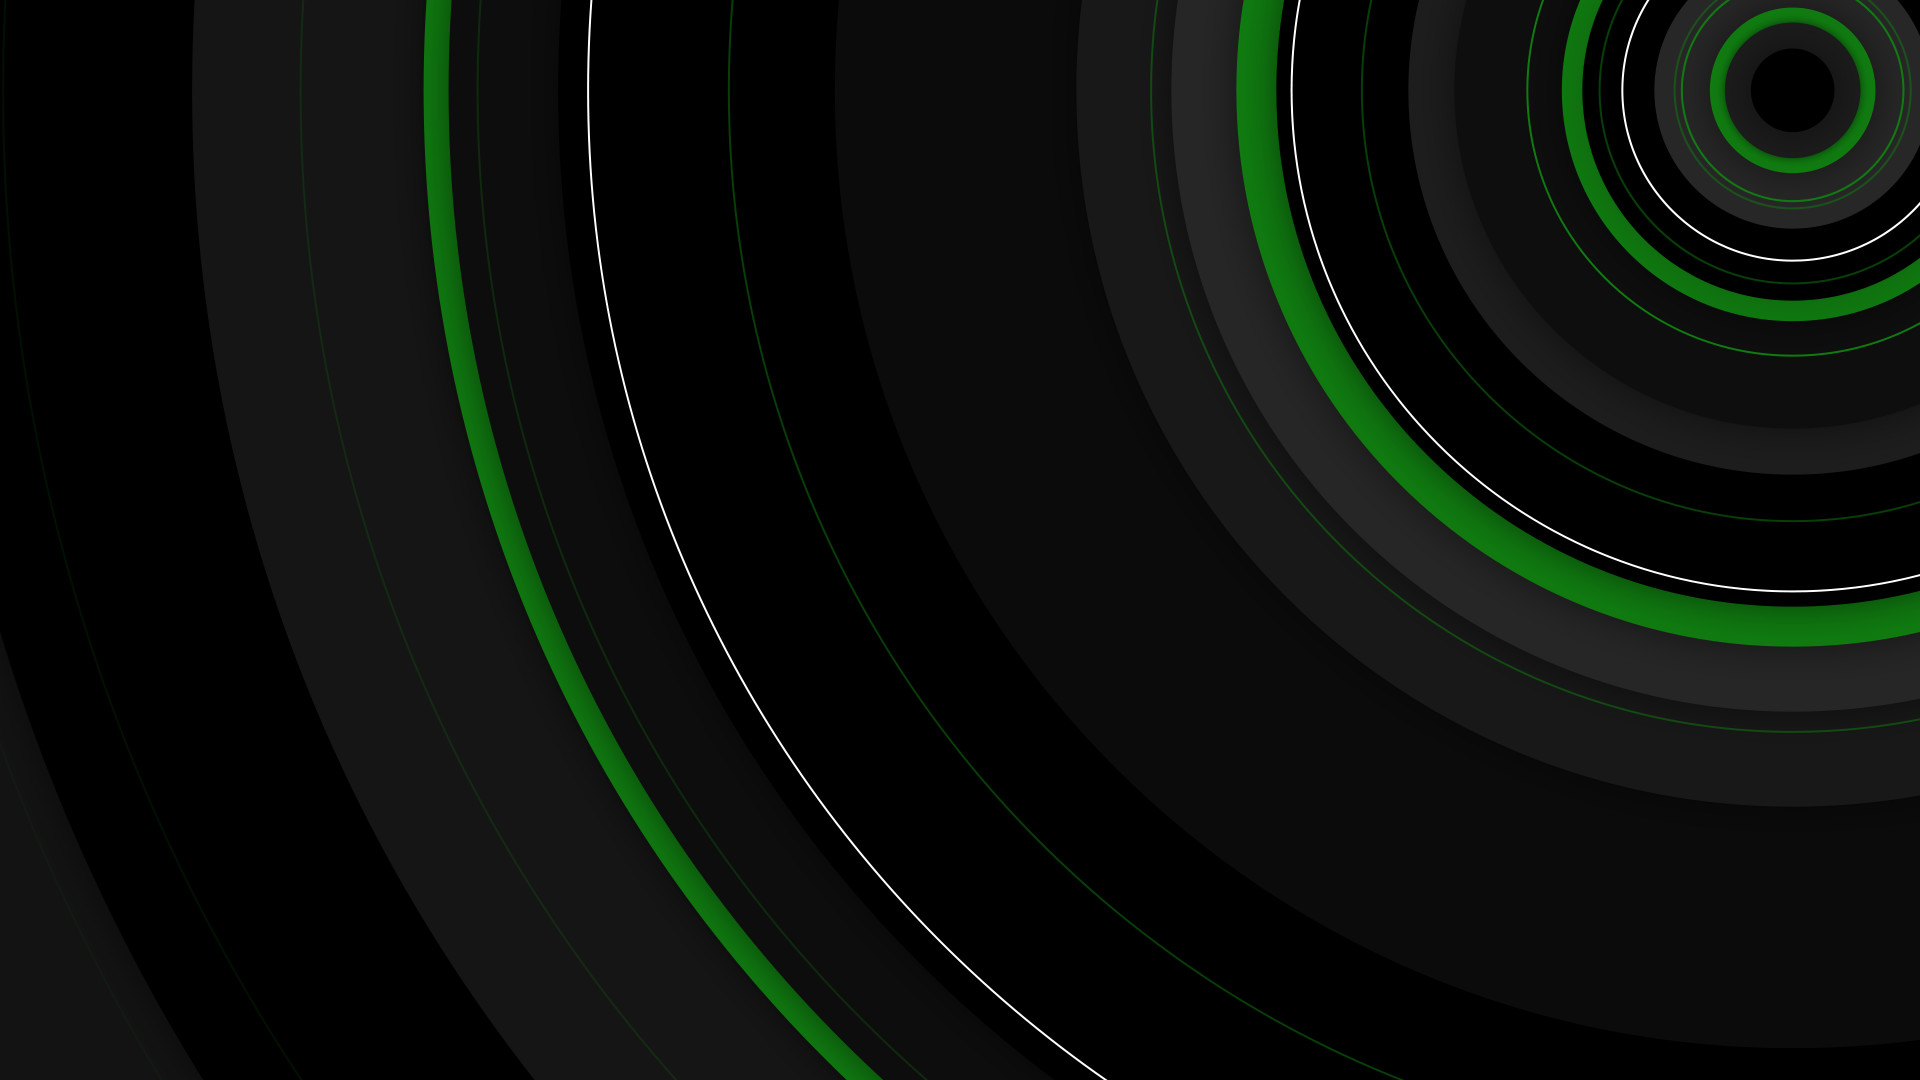 Xbox One Wallpaper 1920x1080 83 Images E97 6219